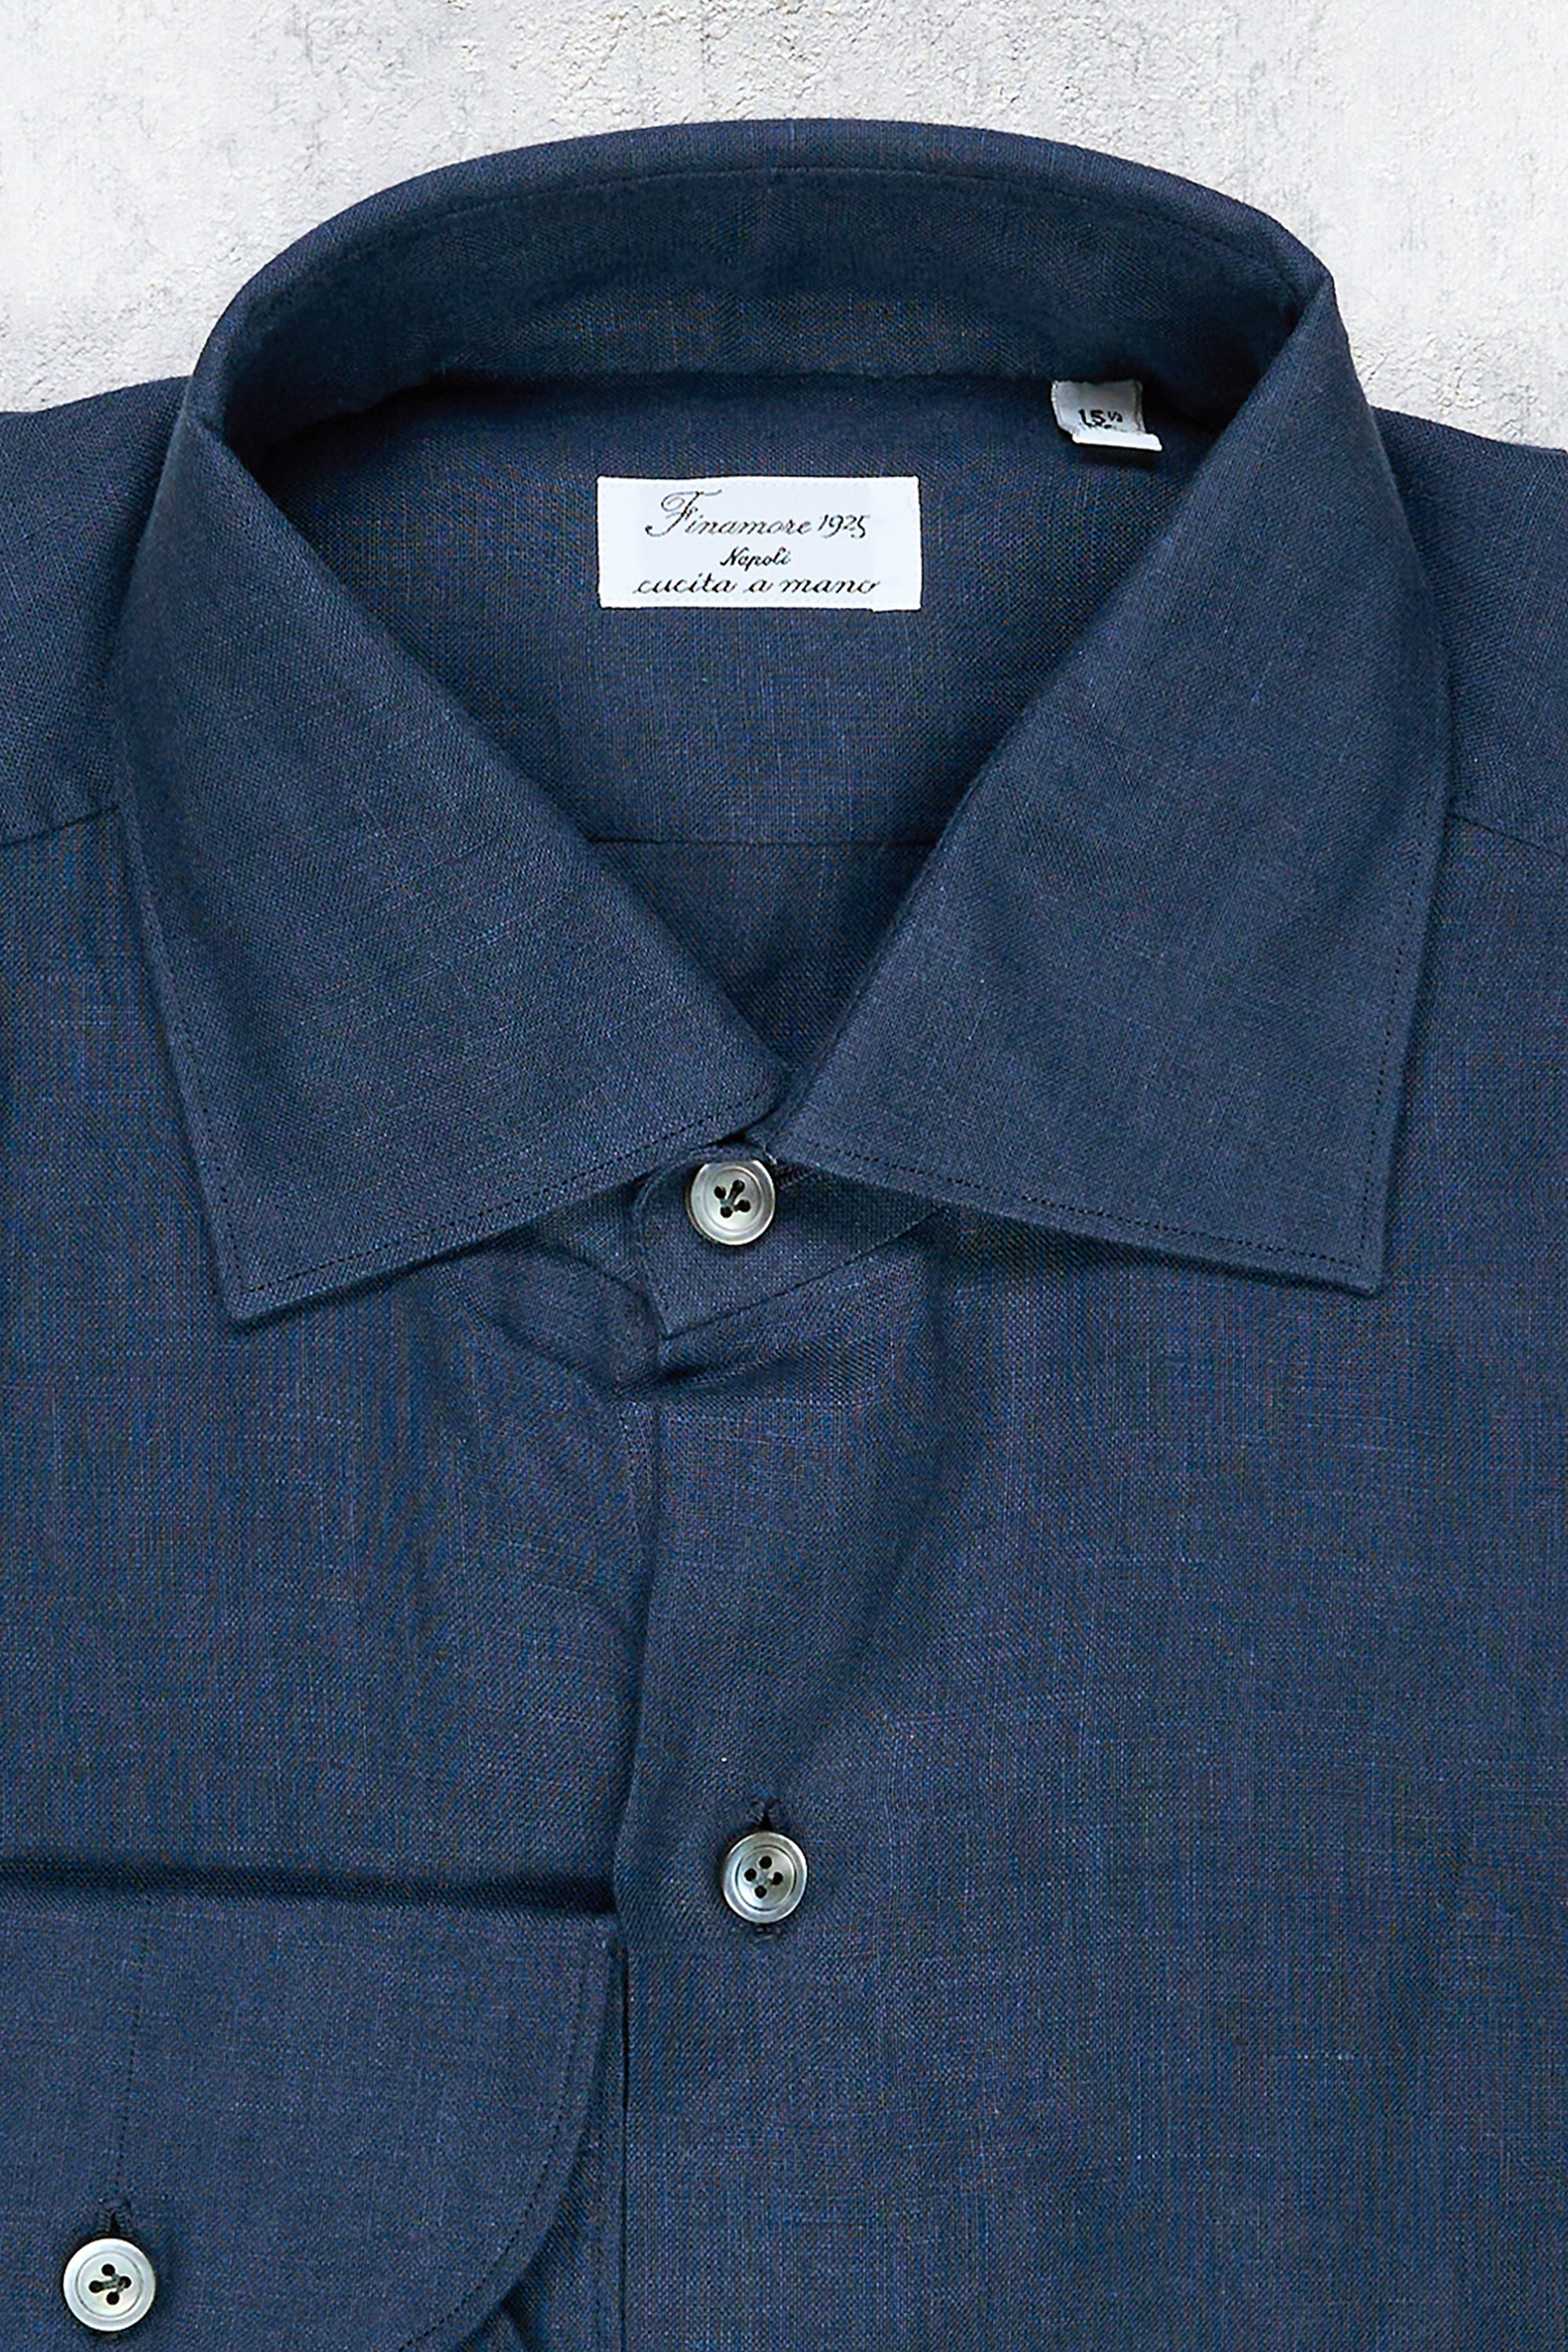 Finamore Navy Linen Spread Collar Shirt *new with defect*